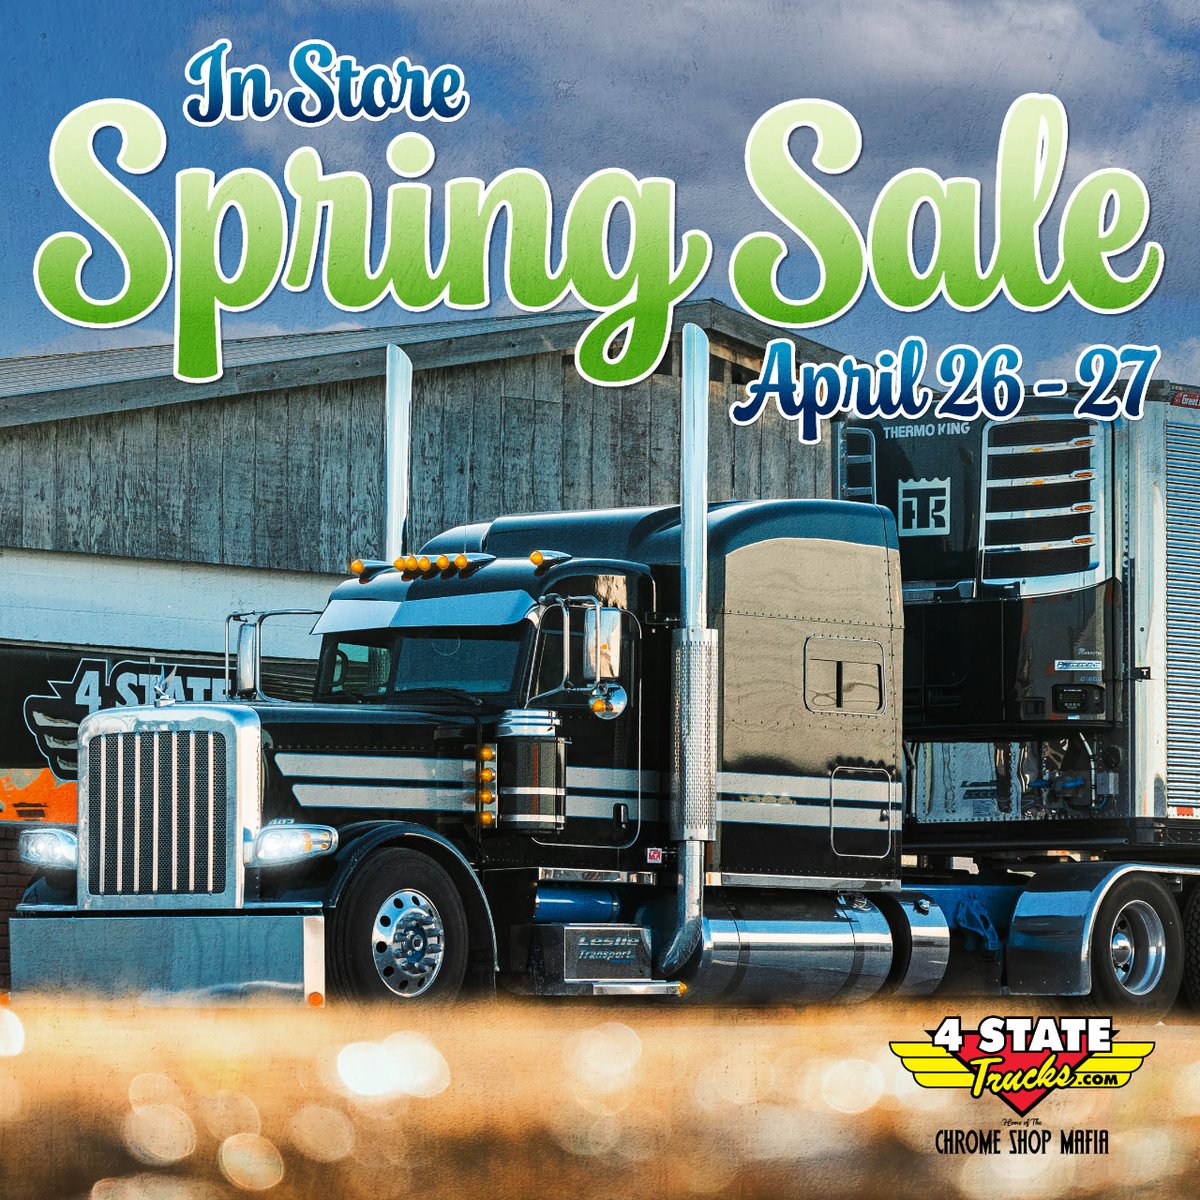 Gettin' closer to the 2-Day In-Store Only Spring Sale at 4 State Trucks April 26 - 27!
Not long now to wait for details. 😎

#4StateTrucks #ChromeShopMafia #chrome #chromeshop #semitrucks #trucking #bigrig #tractortrailer #cdldriver #truckers #diesel